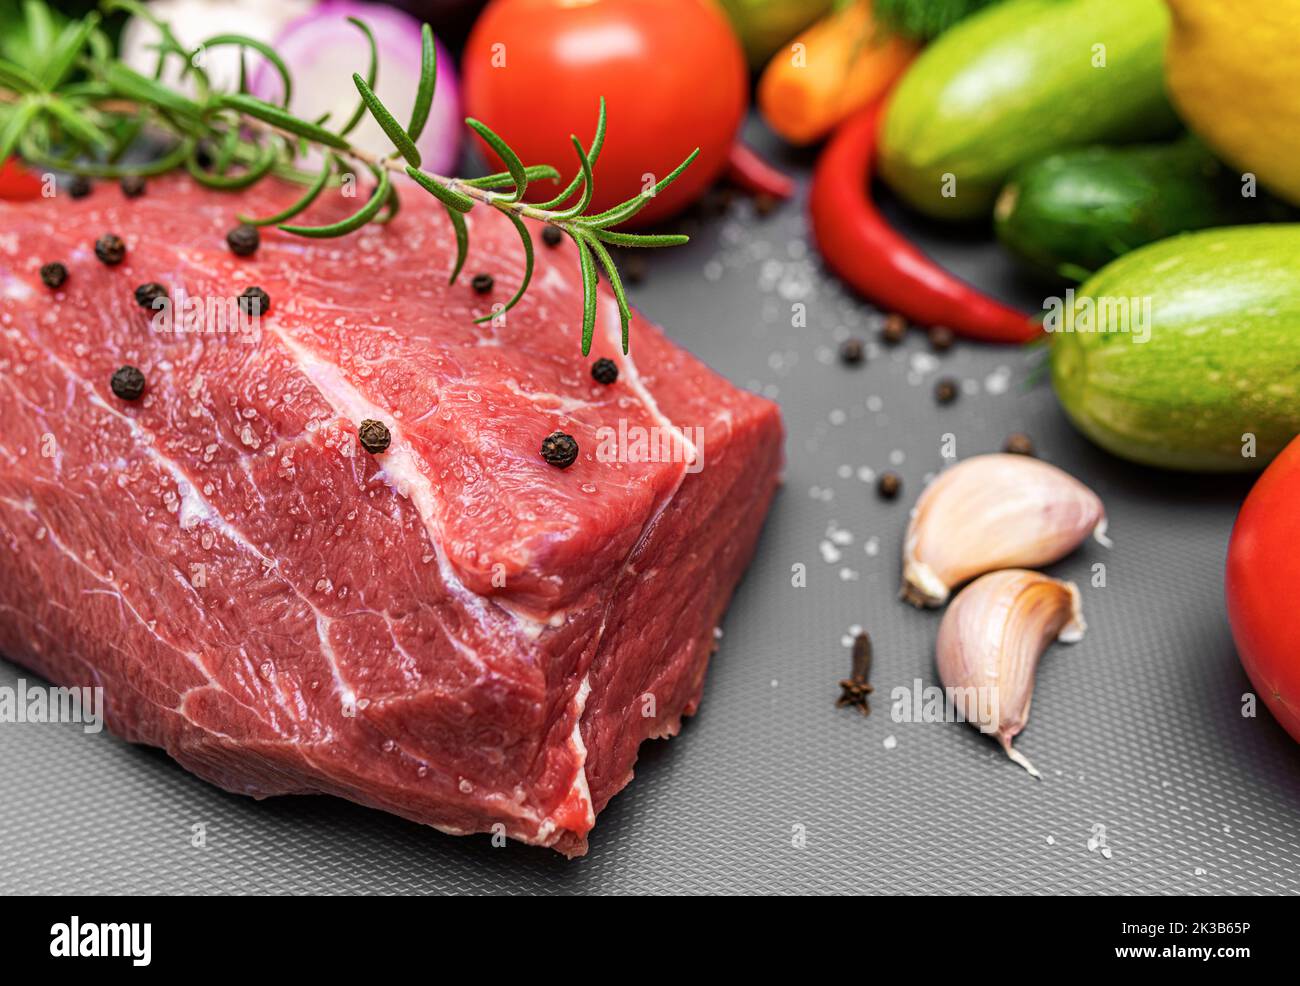 A piece of raw meat on a cutting board. Stock Photo